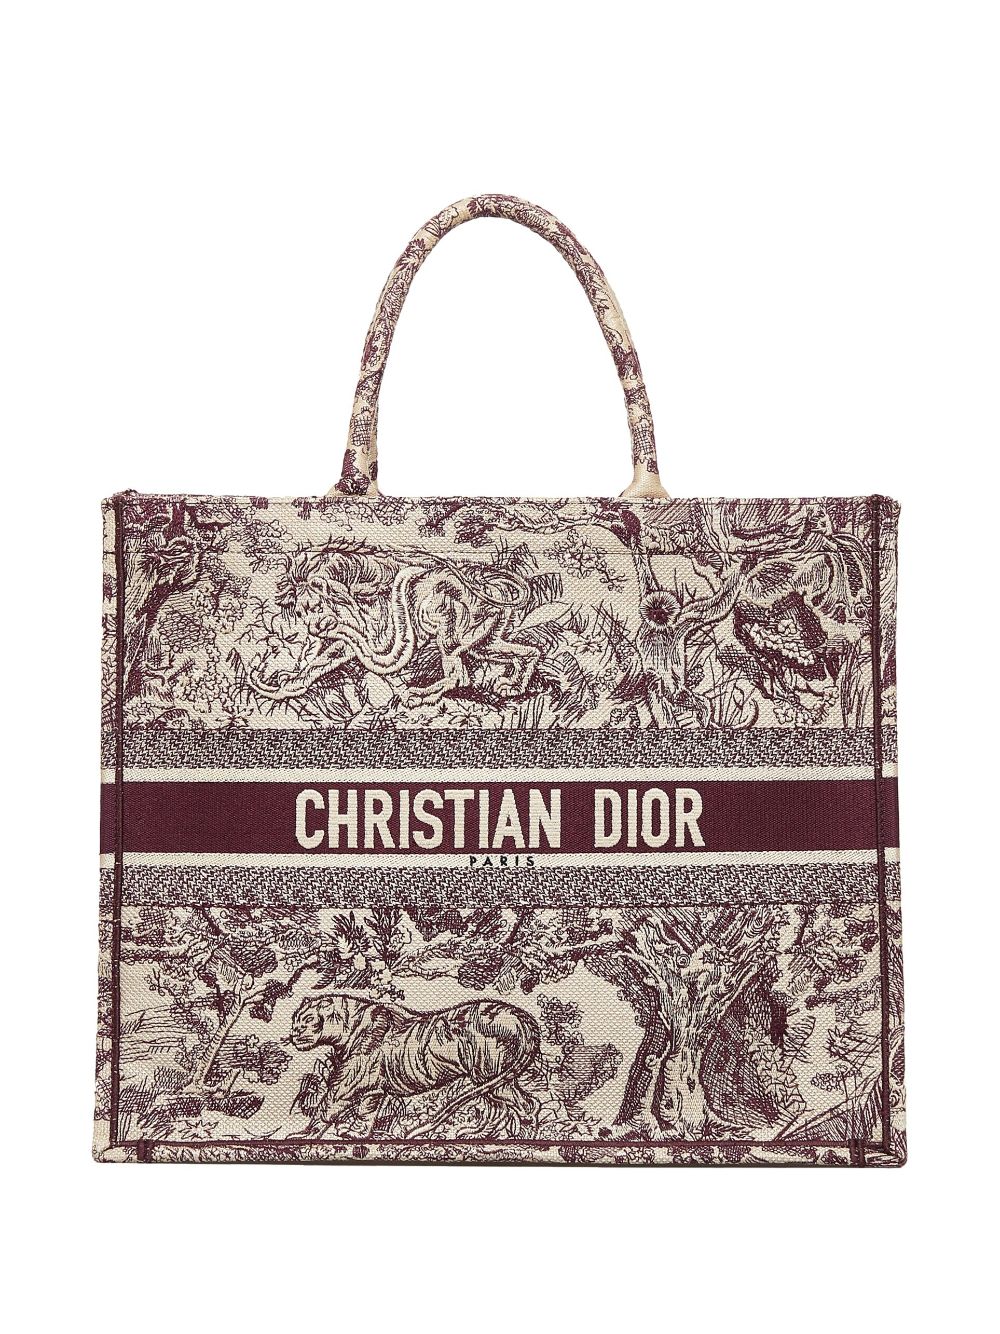 Pre-owned Dior New Christian Tote Bag